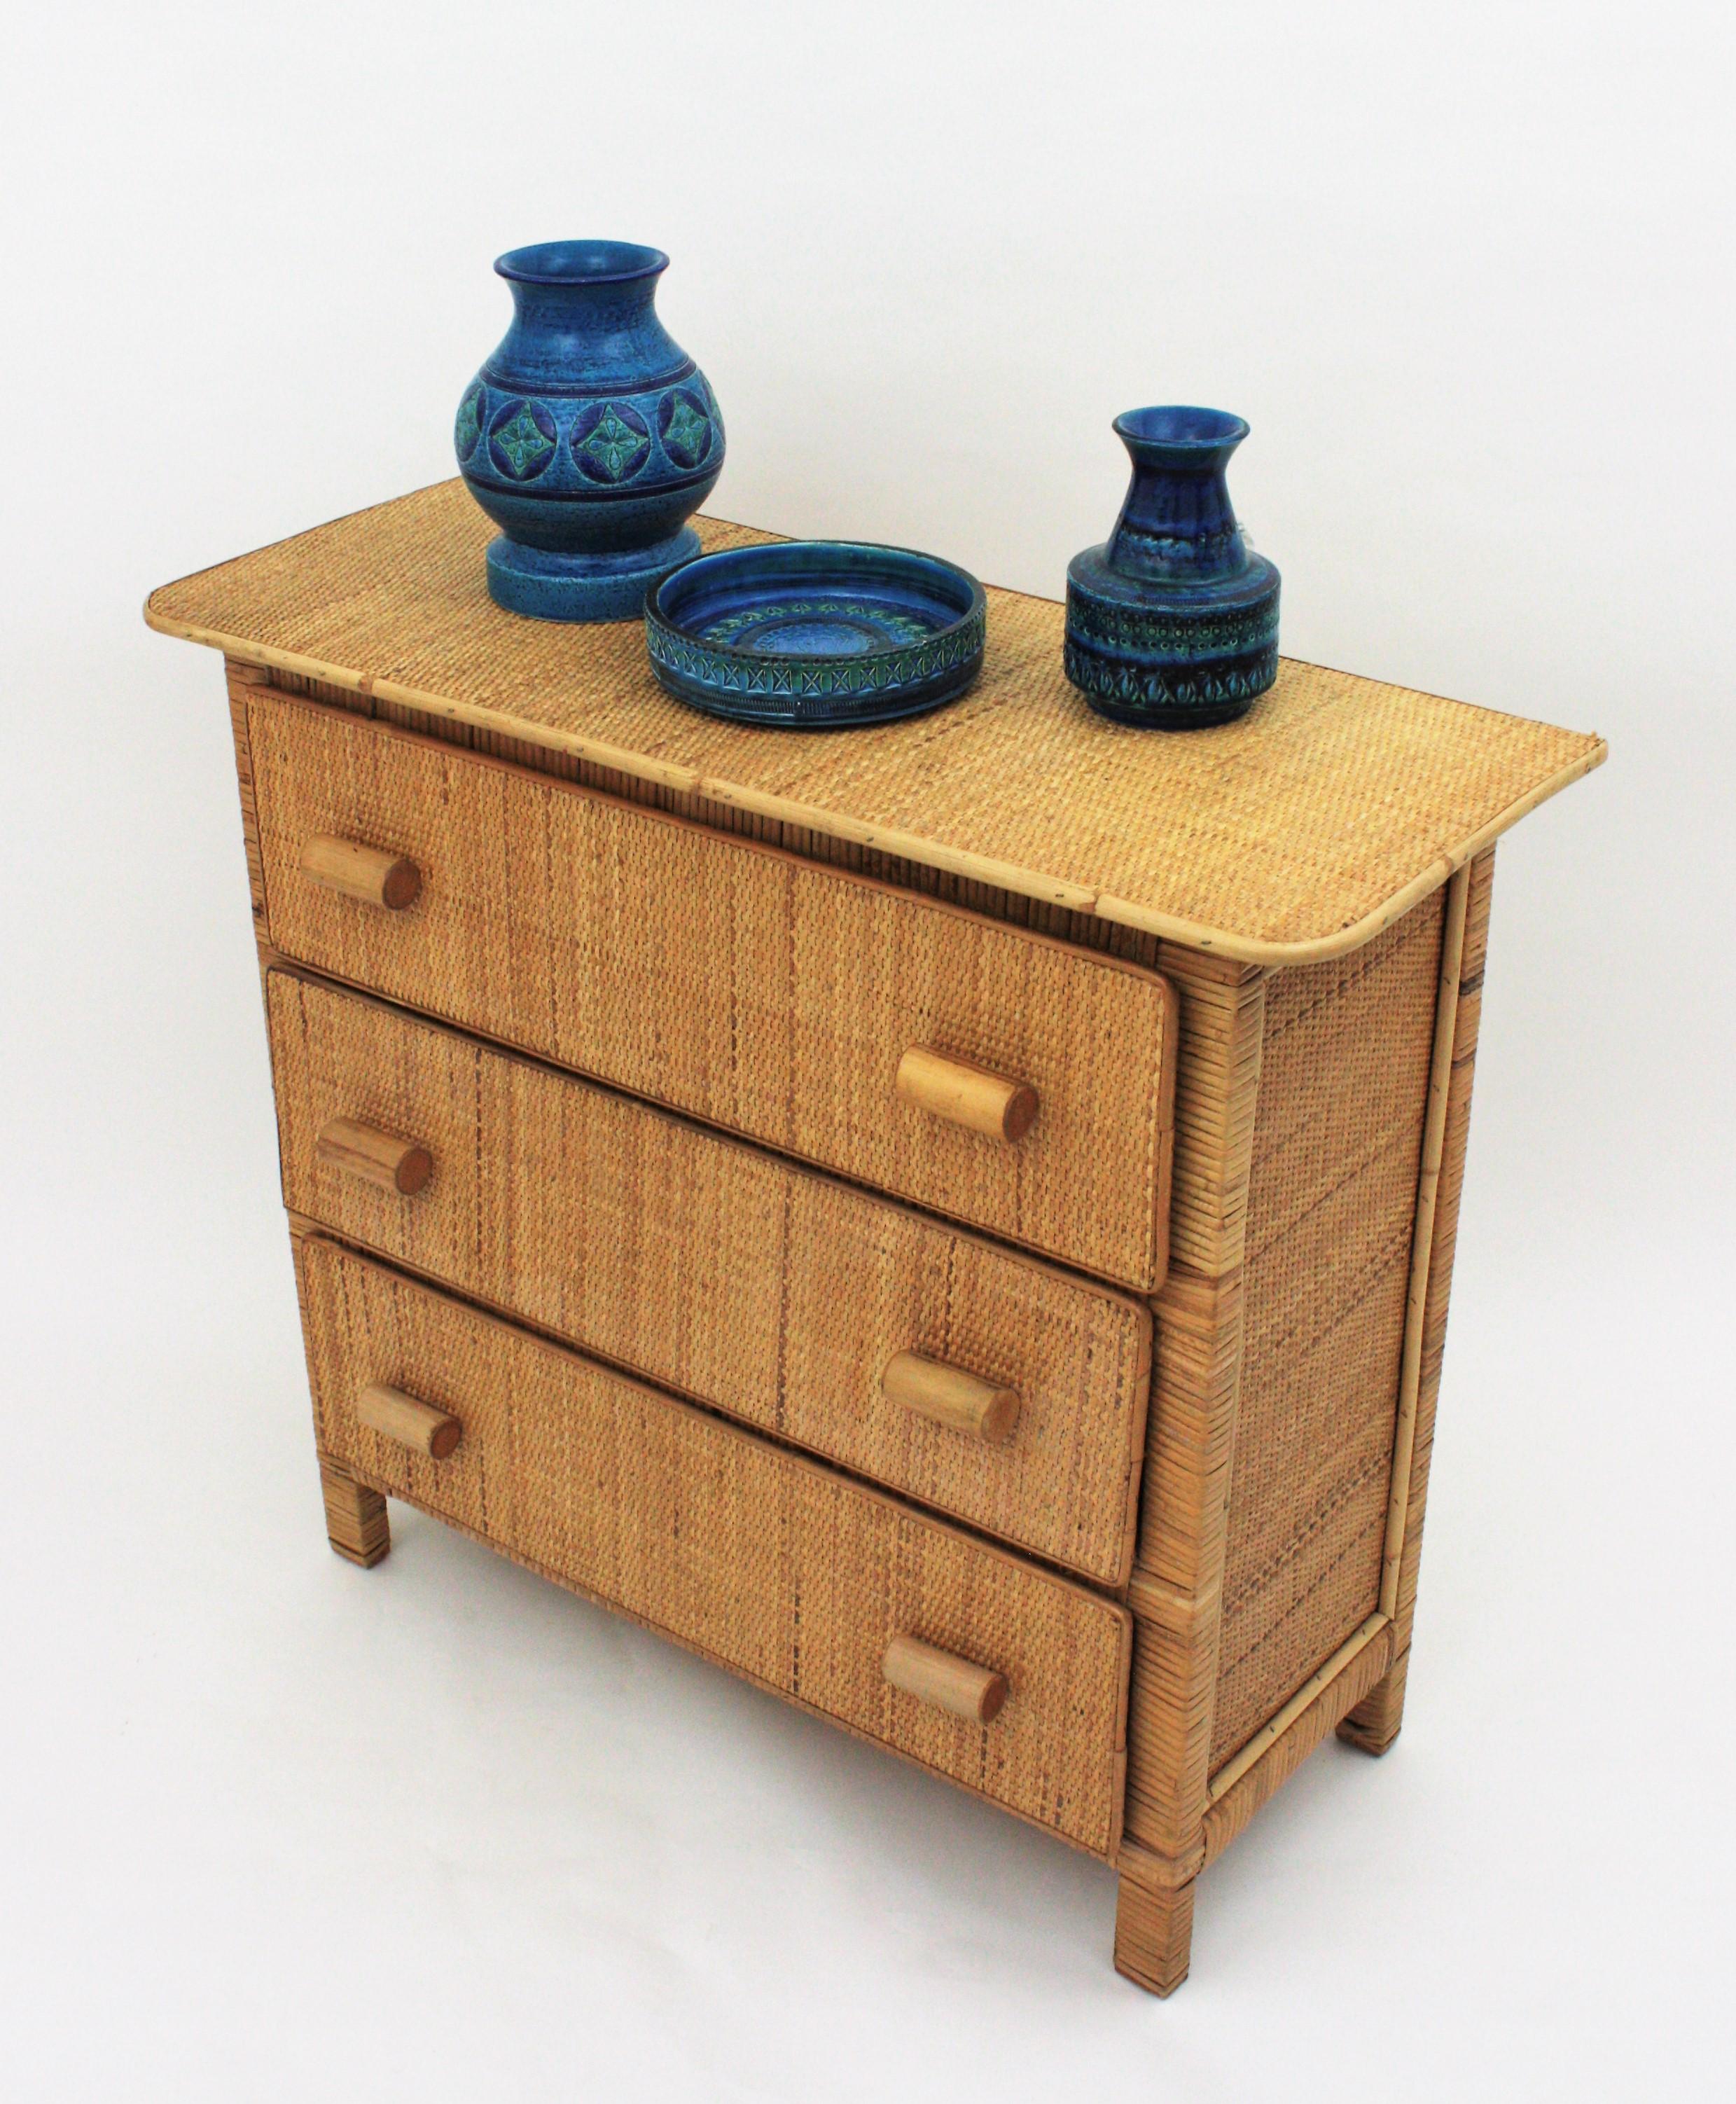 Lovely Mid-Century Modern rattan commode or chest of drawers with bamboo pulls, Spain, 1970s
This beautiful commode is all covered by rattan weave and it has 3 drawers accented by thick rattan cane drawer pulls.
It will be a nice bohemian addition